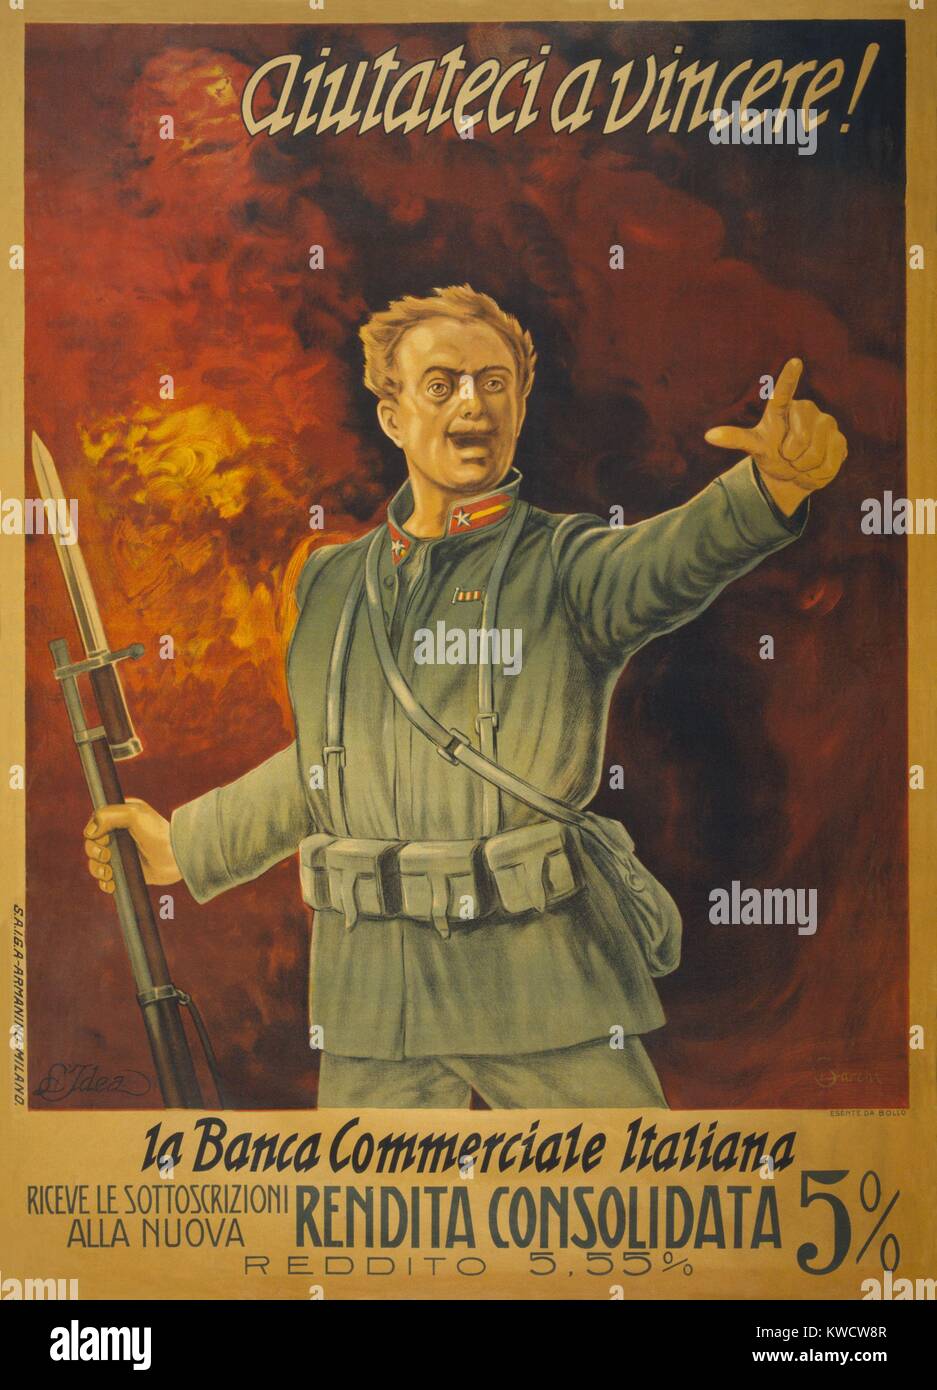 Italian World War 1 bond poster. Standing in front of a wall of fire, and Italian soldier with a bayoneted rifle assumes a heroic battle posture. The text advertises the latest subscription for war bonds offering 5% interest. (BSLOC 2013 1 22) Stock Photo